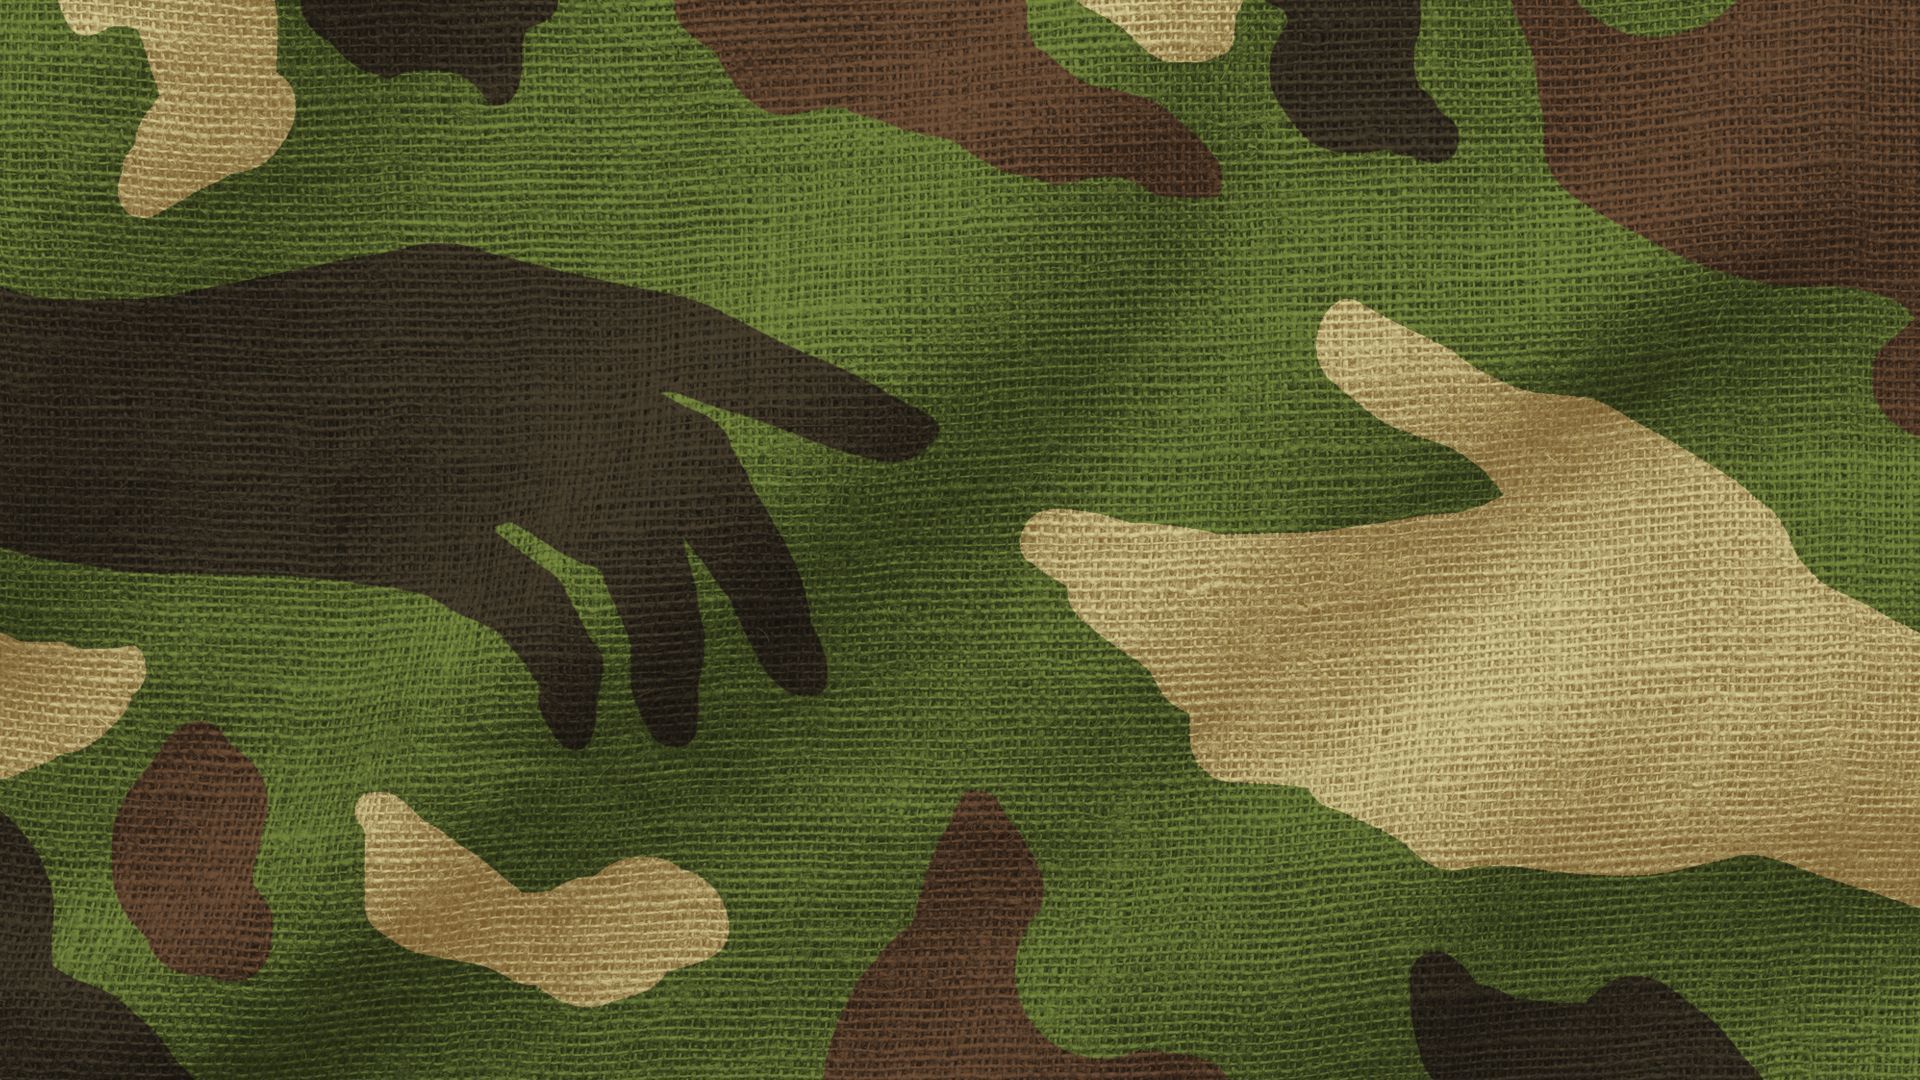 Illustration of military camouflage with patterns in the shape of reaching hands